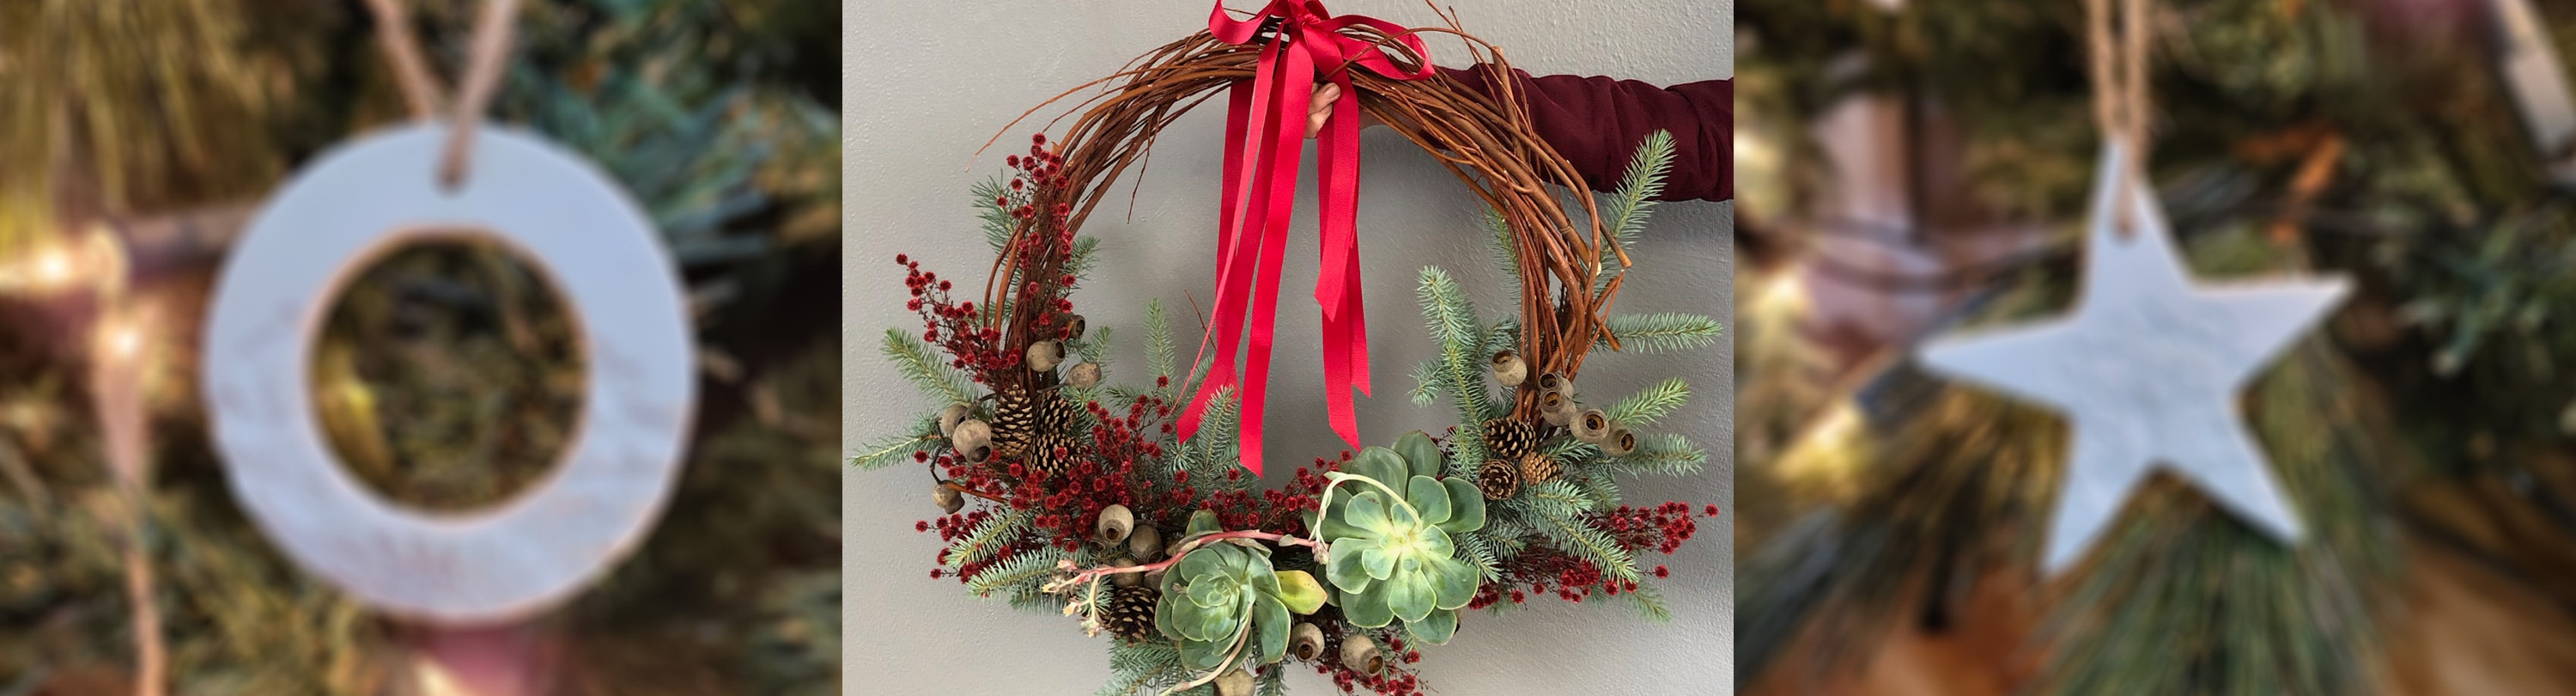 An image of a festive season wreath with a red ribbon draping down from the top and a hand from the right of the image is holding the wreath